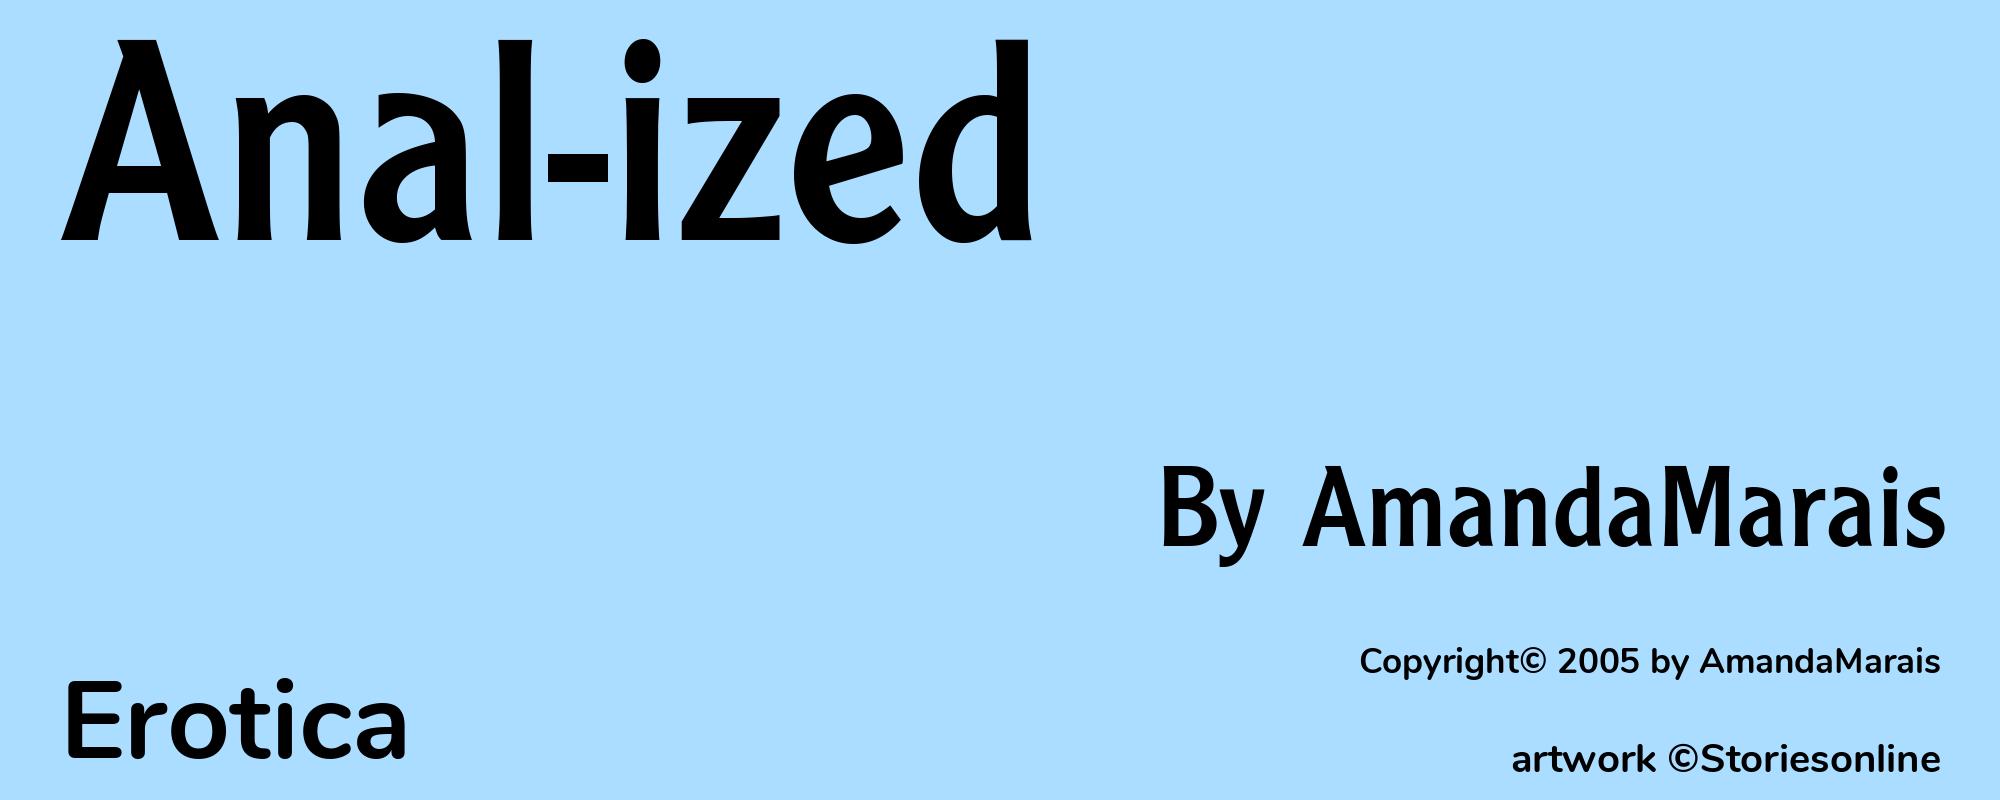 Anal-ized - Cover